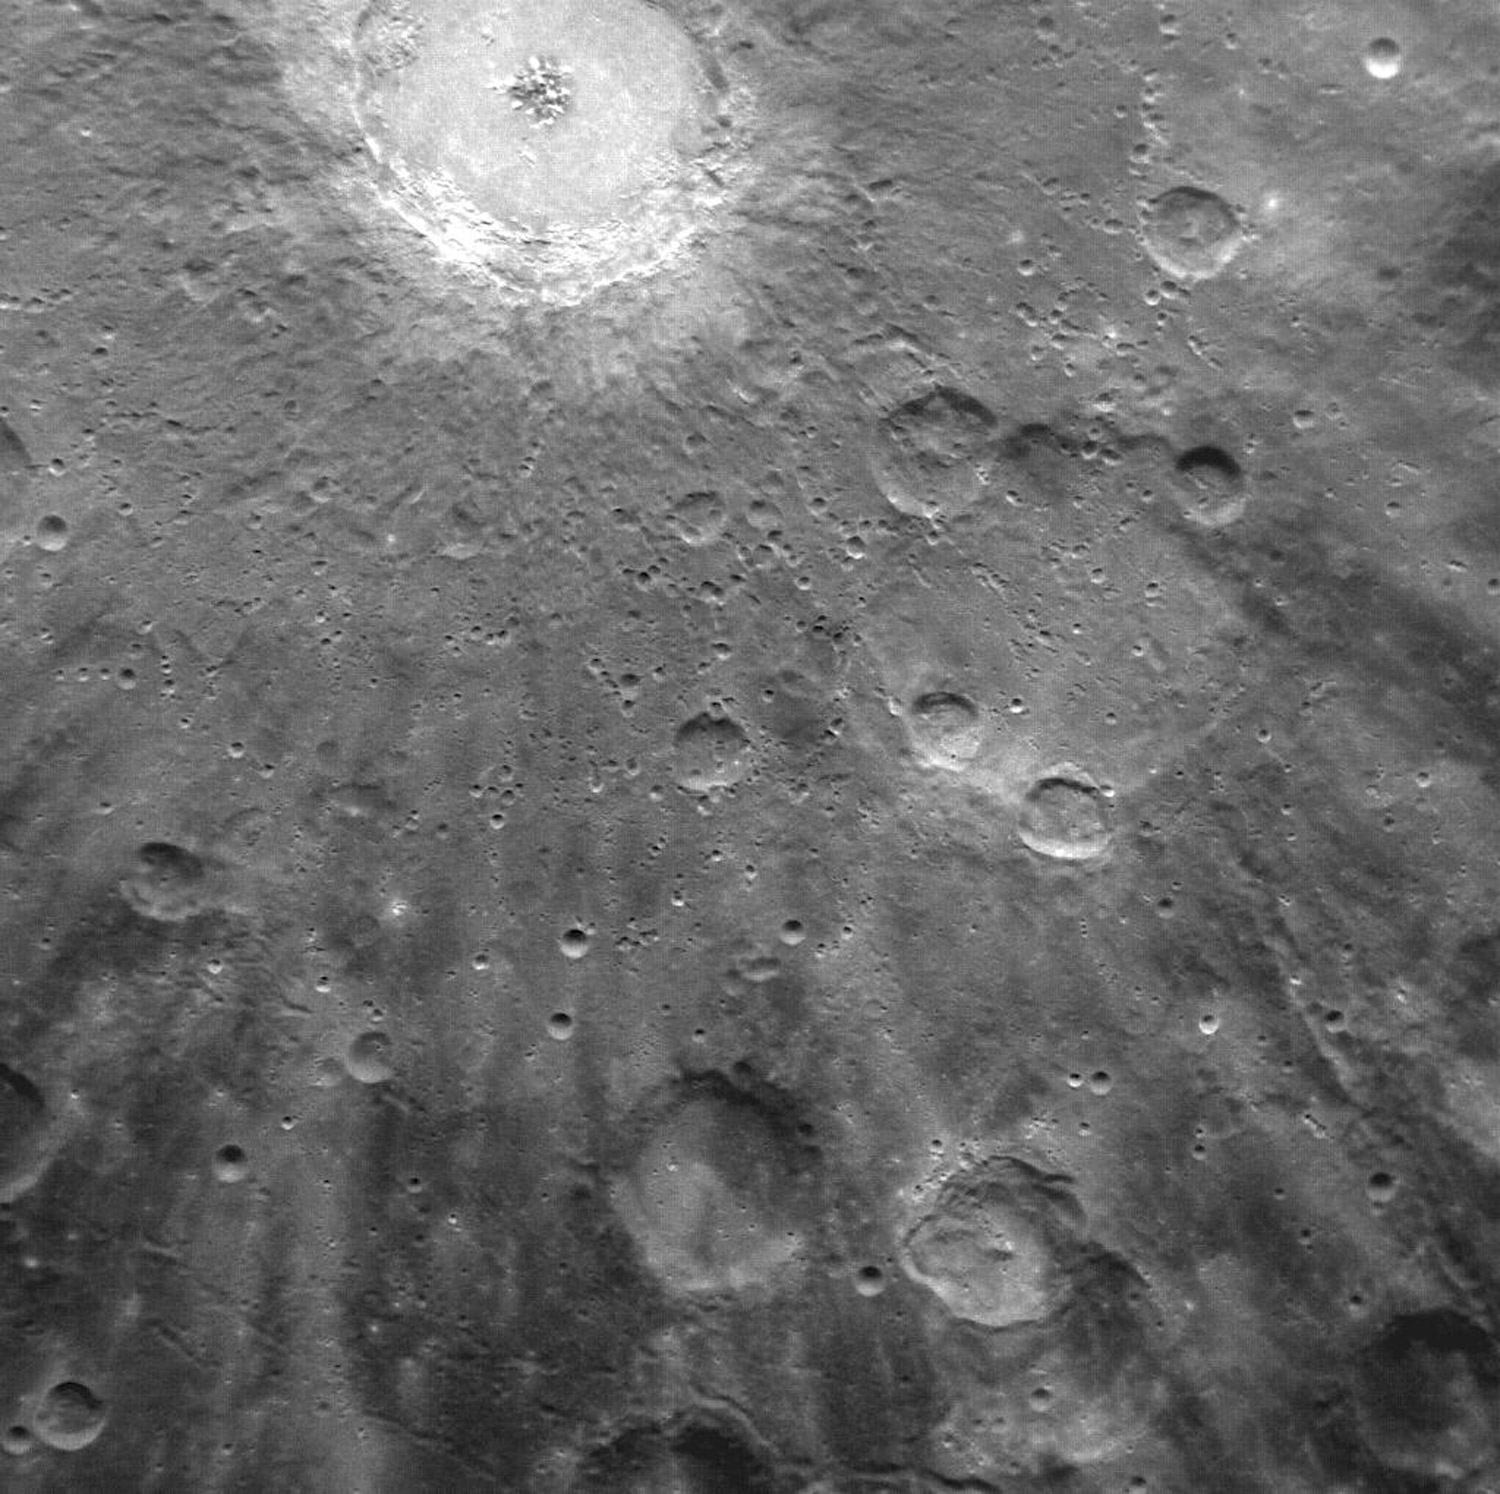 This is not the first time the Debussy crater—named for French composer Claude Debussy—has been photographed by Messenger, but it’s never before been captured in this detail. Rays, impact ejecta and secondary craters surround the central formation. Rich as such a closeup is, it doesn’t capture the true scale of the entire Debussy formation, whose rays stretch hundreds of kilometers.